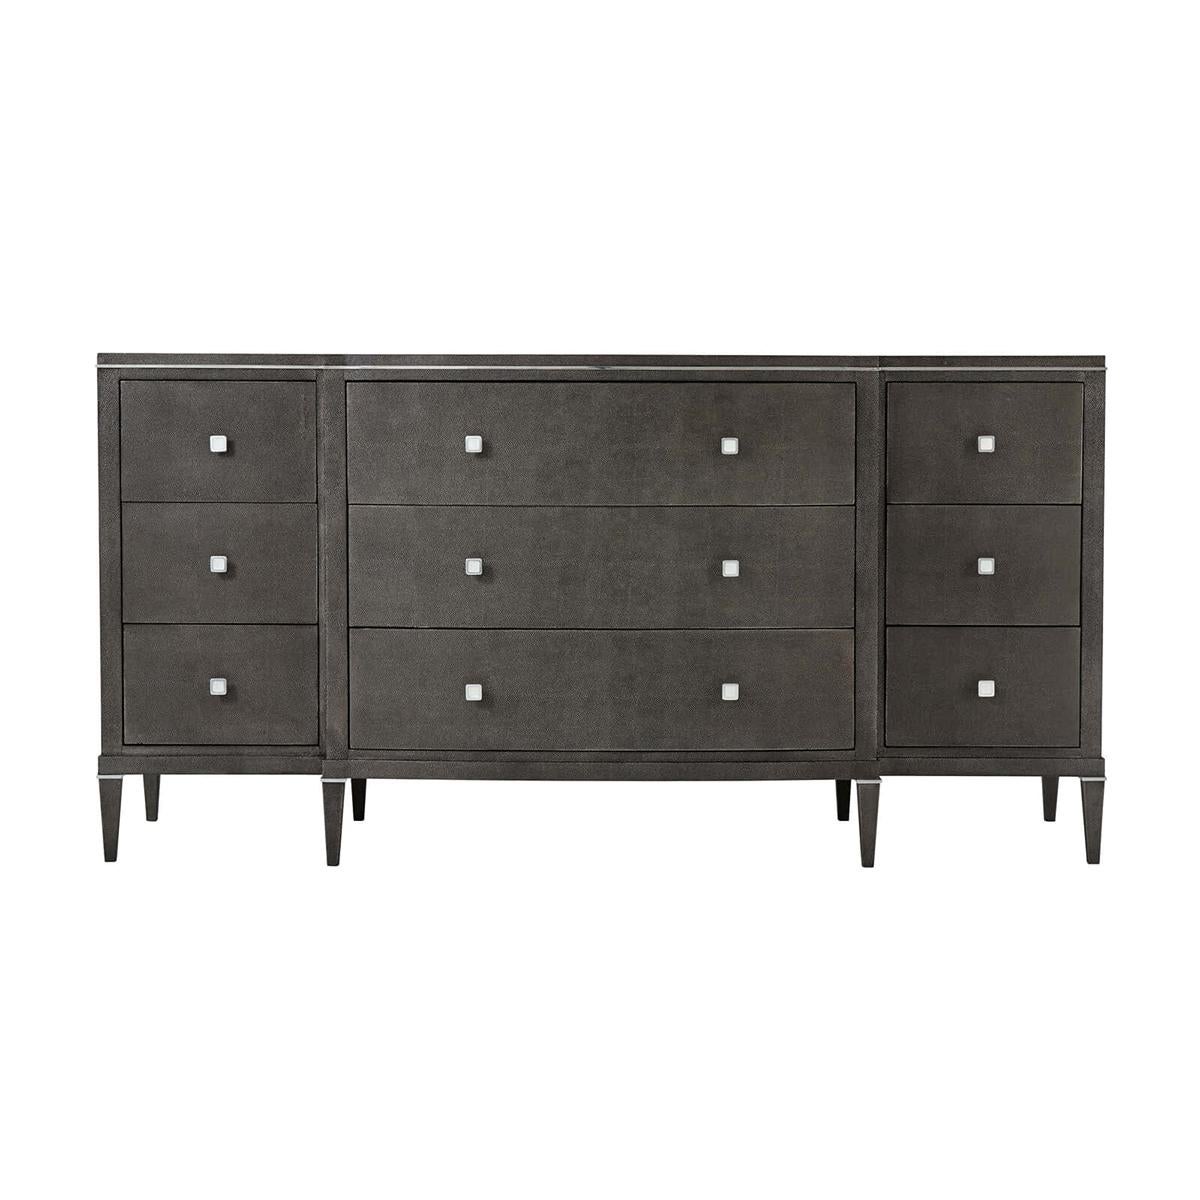 Art Deco leather dresser wrapped in shagreen embossed leather in our dark tempest finish. A nine-drawer dresser with a shaped breakfront having polished nickel hardware and details and raised on square tapered legs.

Dimensions: 71